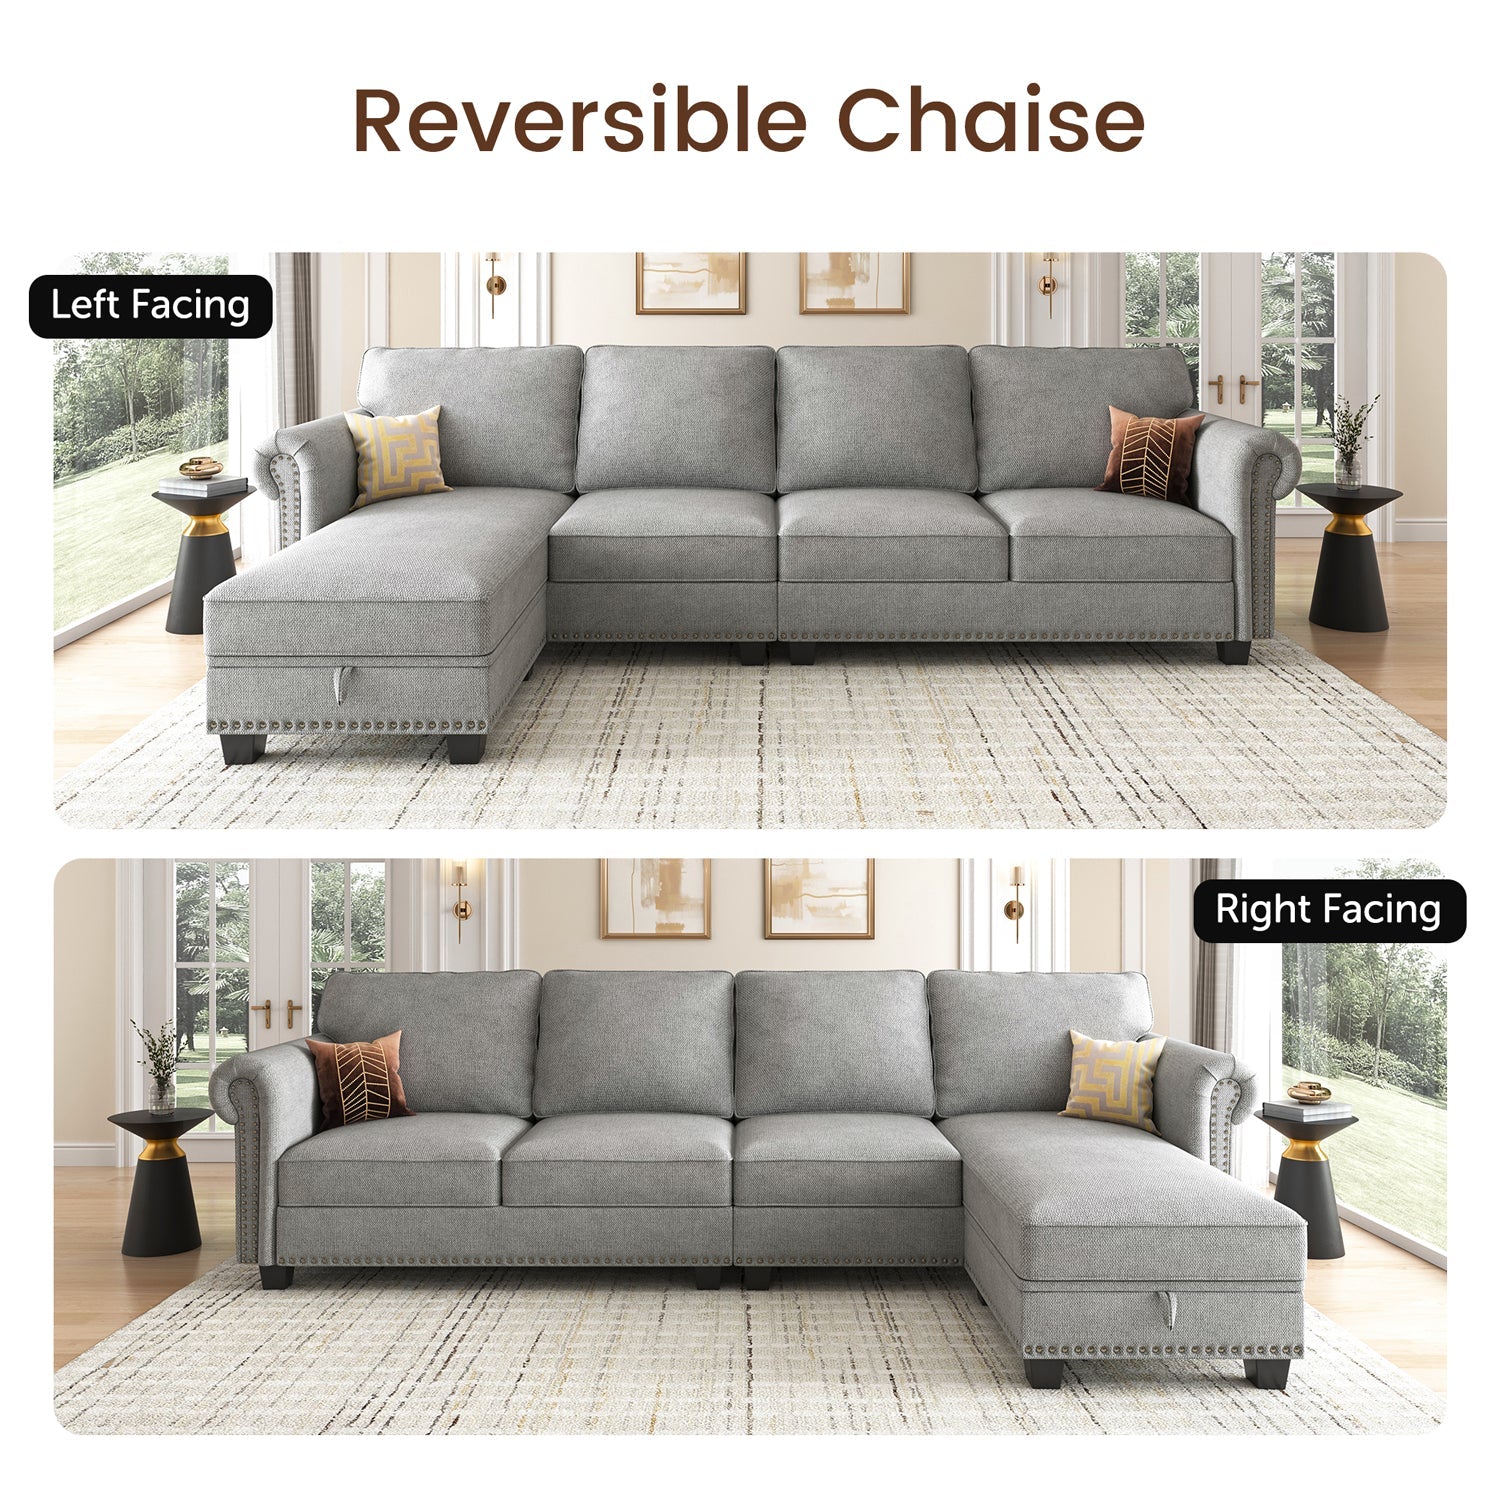 Linen Convertible Sectional With Storage Ottoman Sale price With Measurements